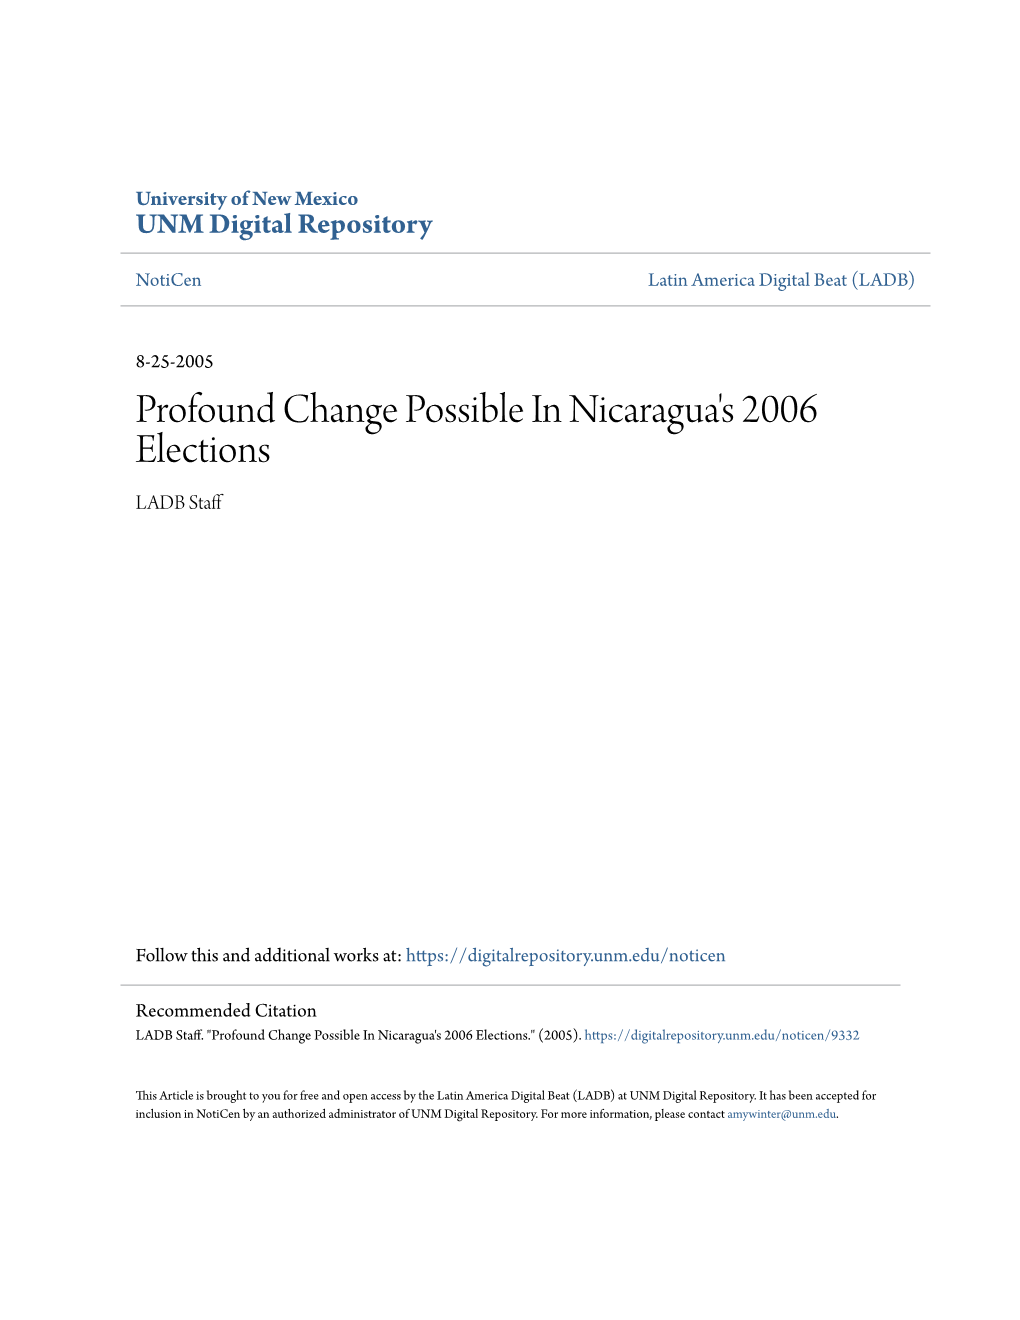 Profound Change Possible in Nicaragua's 2006 Elections LADB Staff